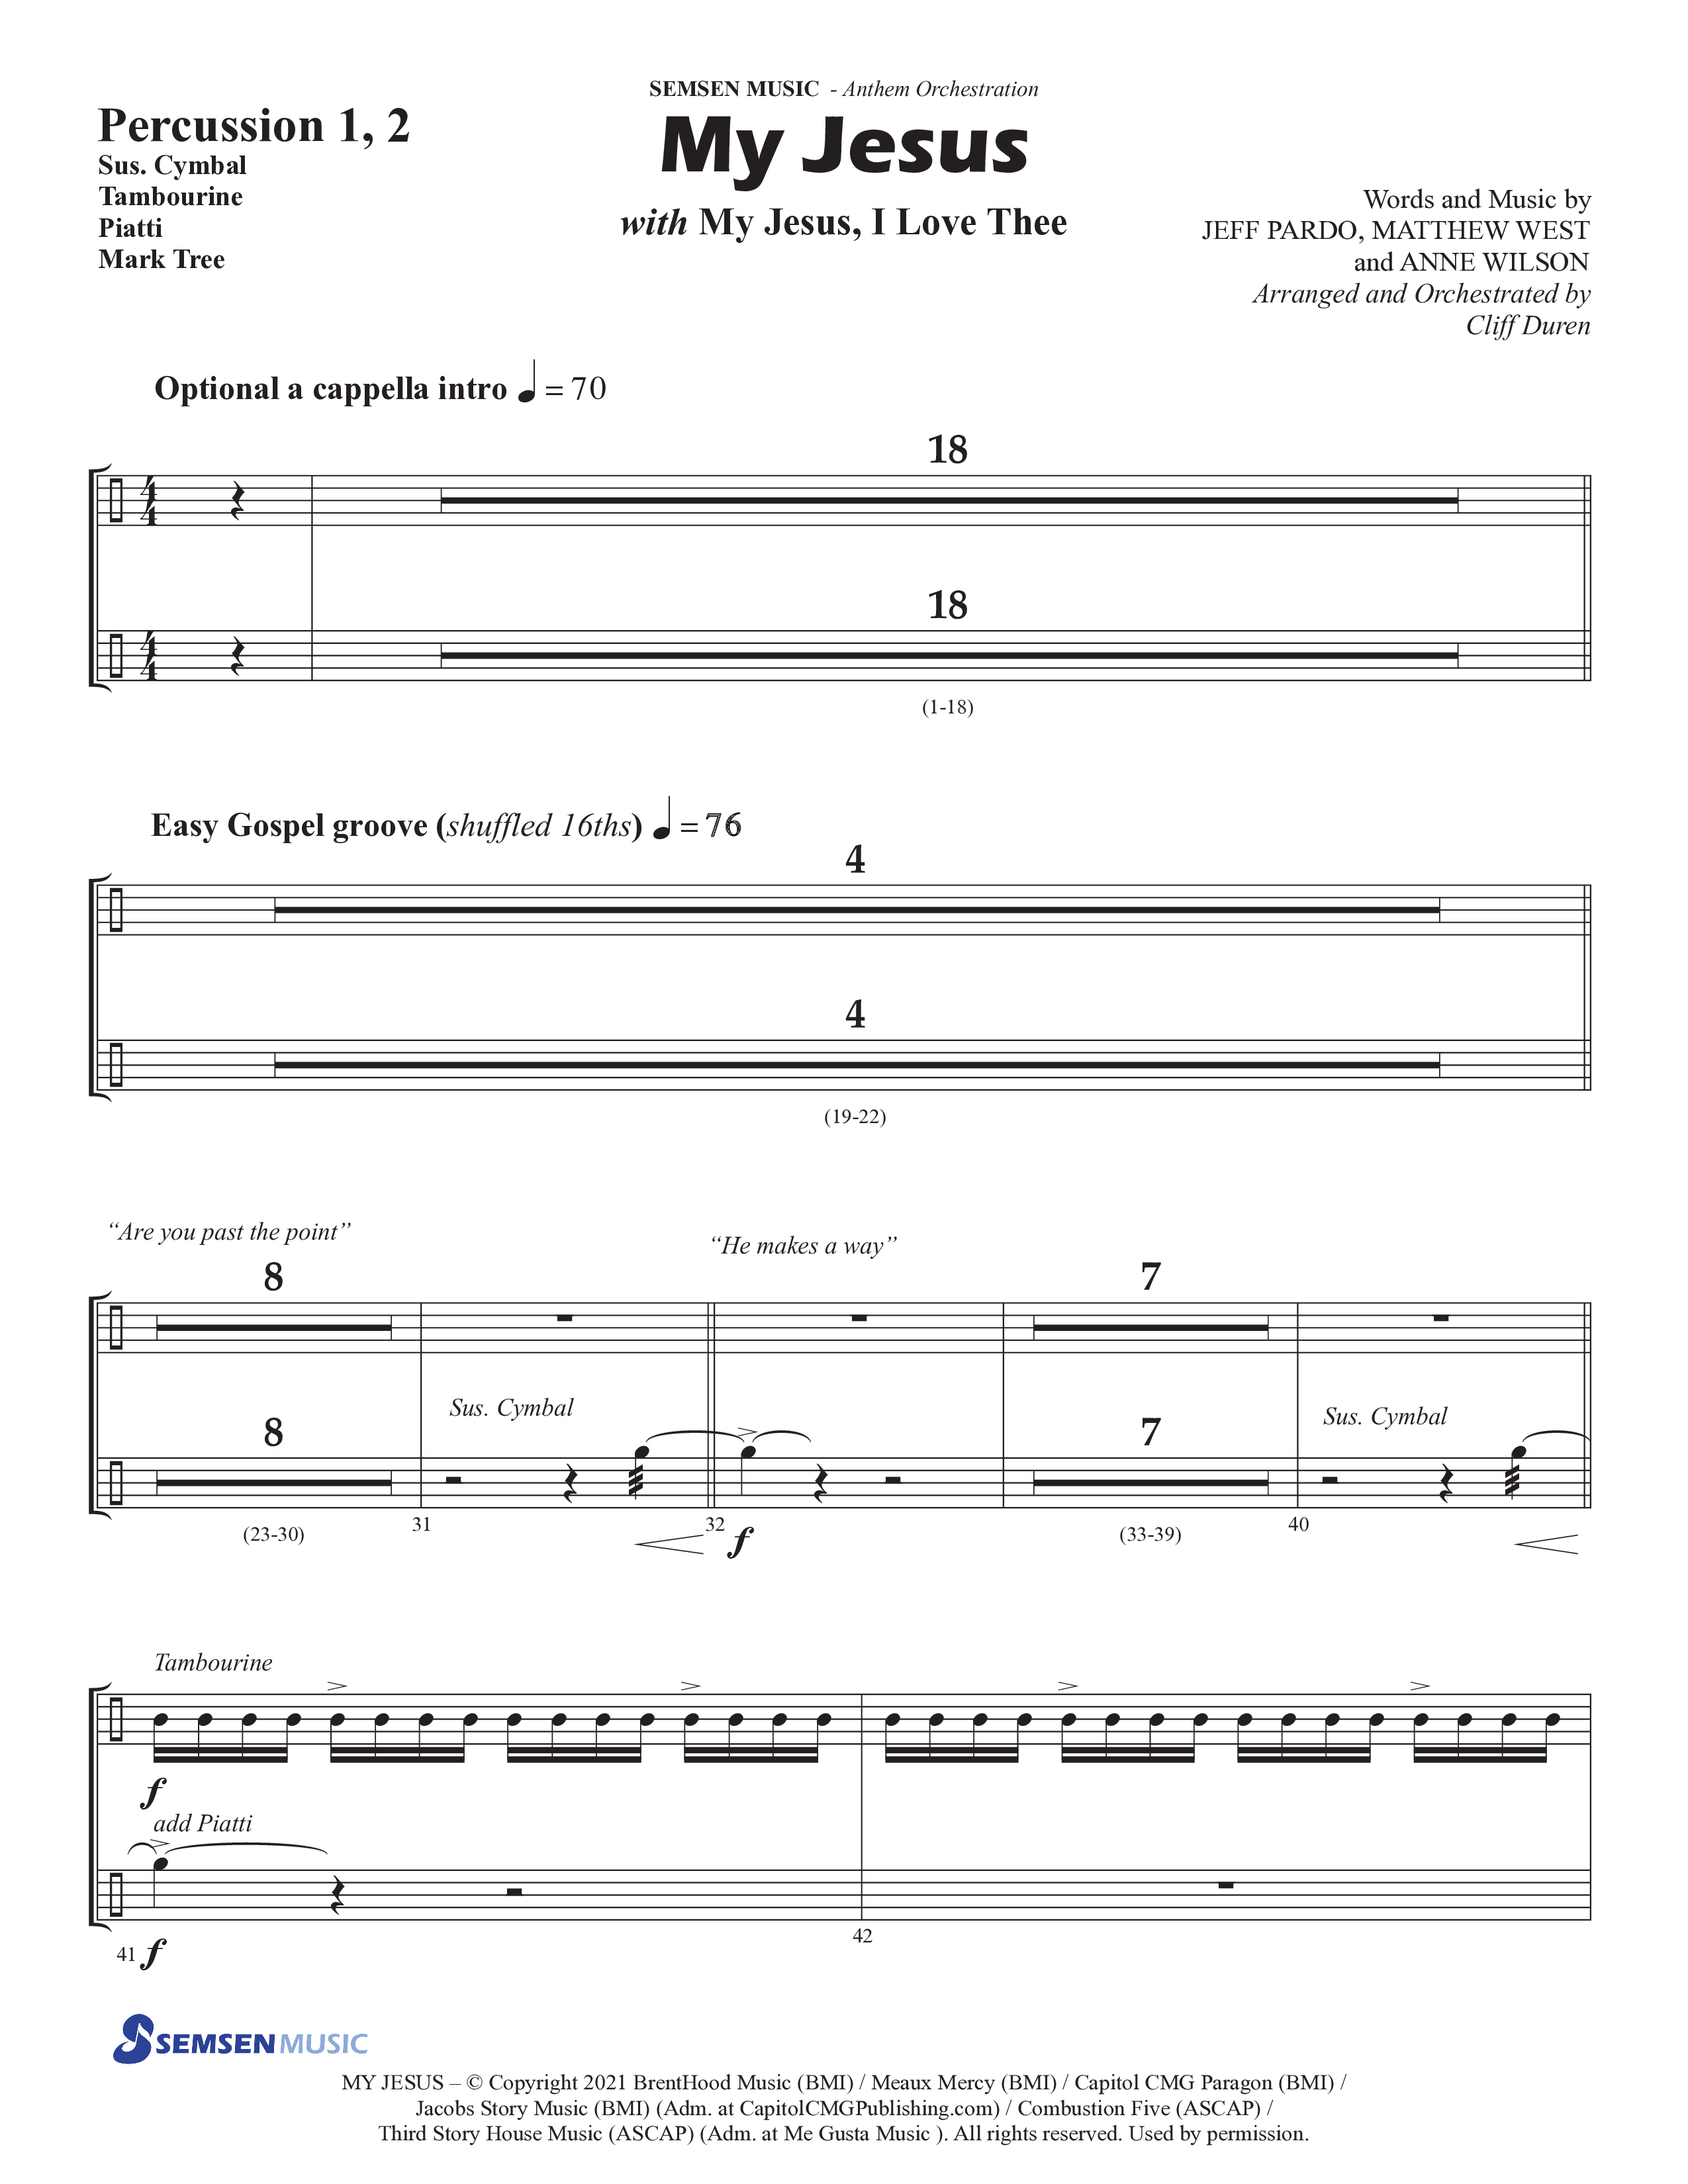 My Jesus (with My Jesus I Love Thee) (Choral Anthem SATB) Percussion 1/2 (Semsen Music / Arr. Cliff Duren)